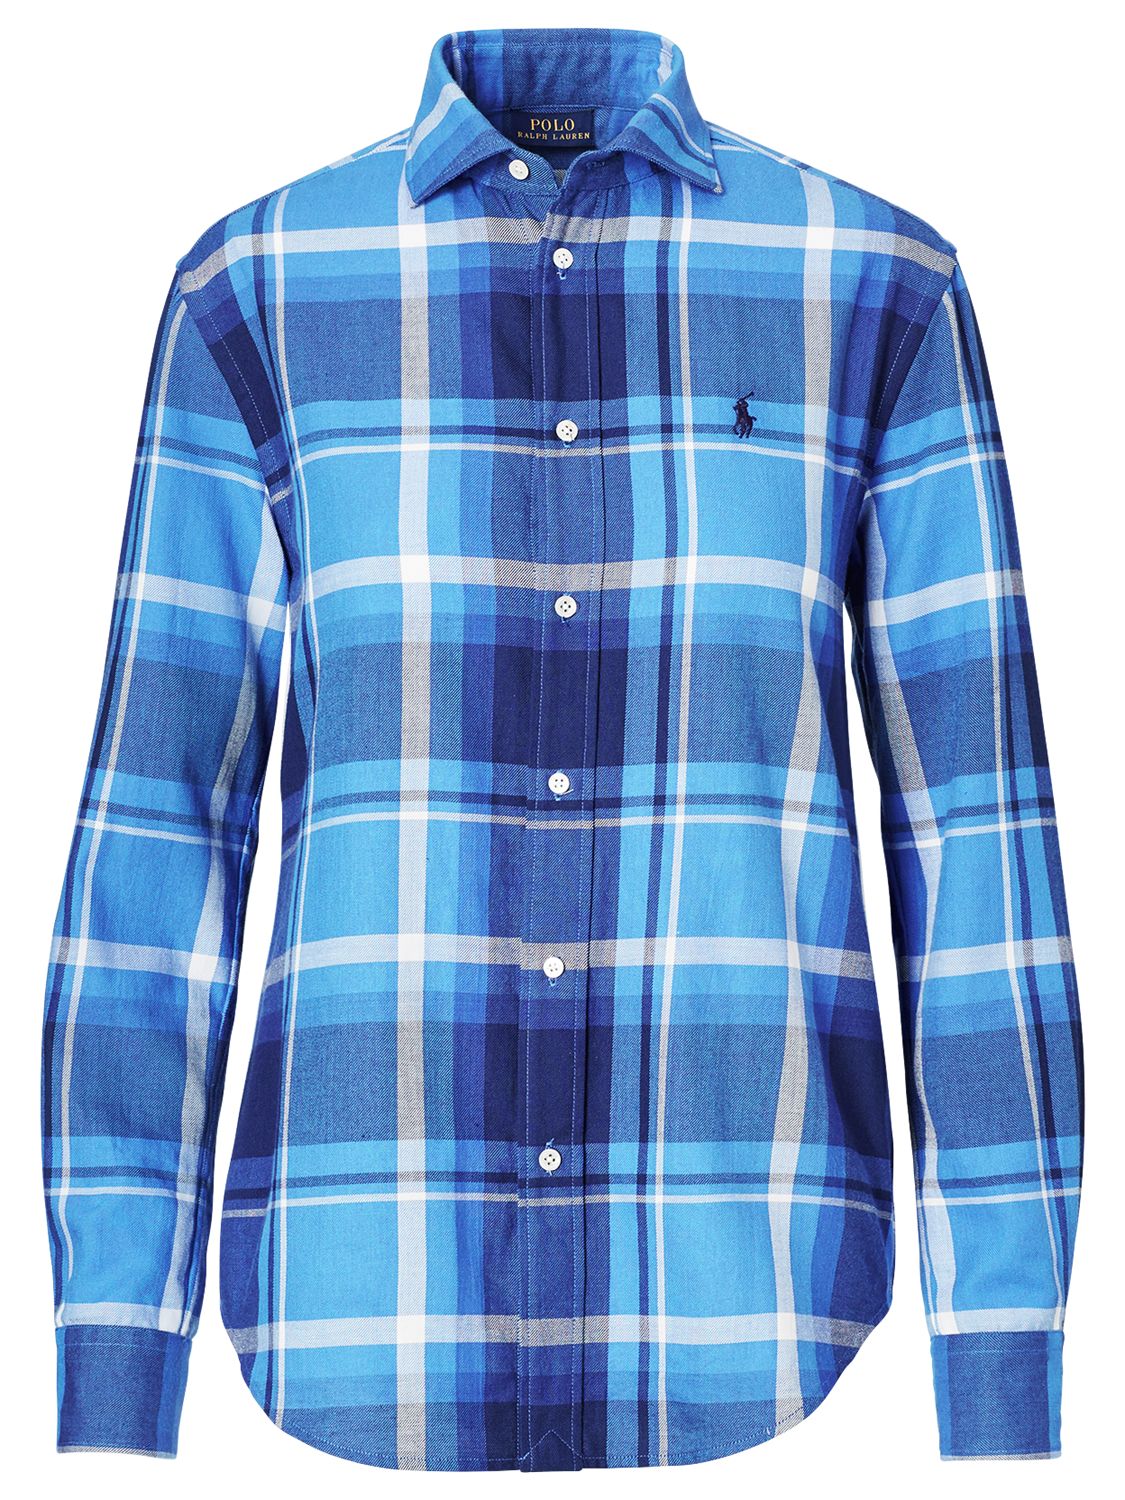 Polo Ralph Lauren Relaxed Fit Plaid Cotton Shirt, Lake Blue/Navy